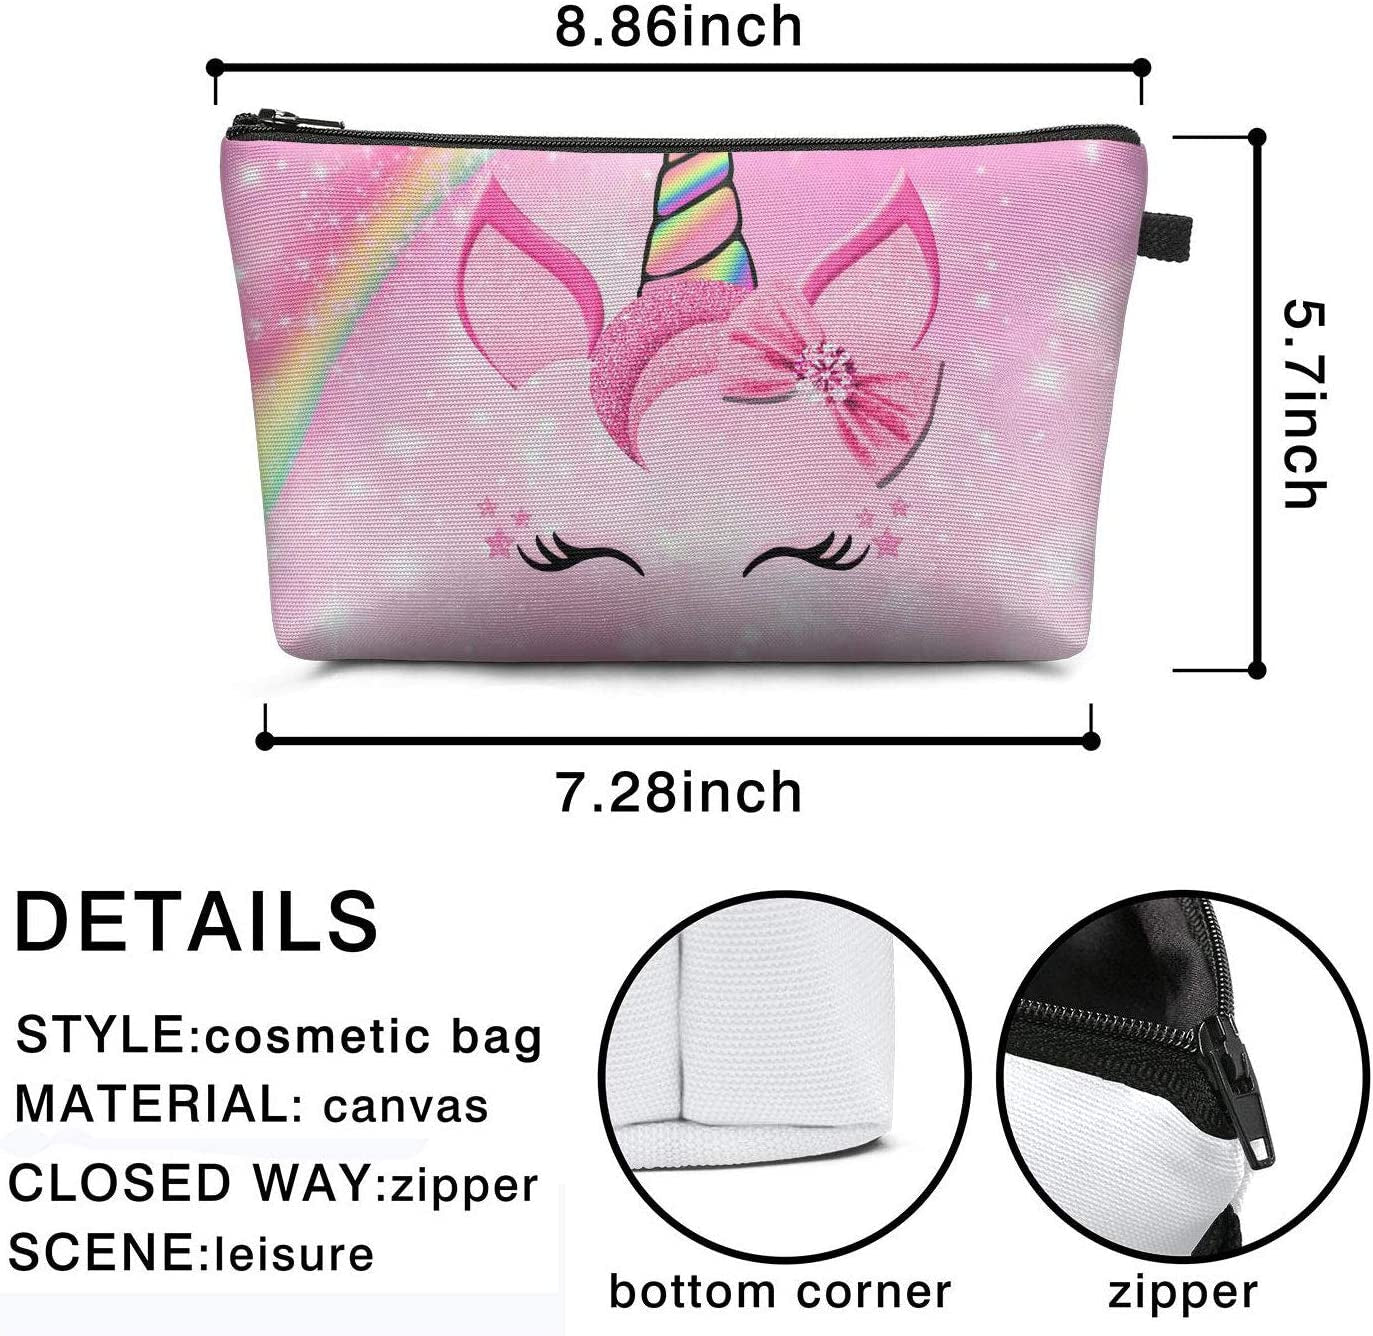 "Magical Unicorn Gift Set for Girls - Includes Drawstring Backpack, Makeup Bag, Jewelry, Necklace, Hair Ties, and Coin Purse - Perfect Birthday Surprise!"